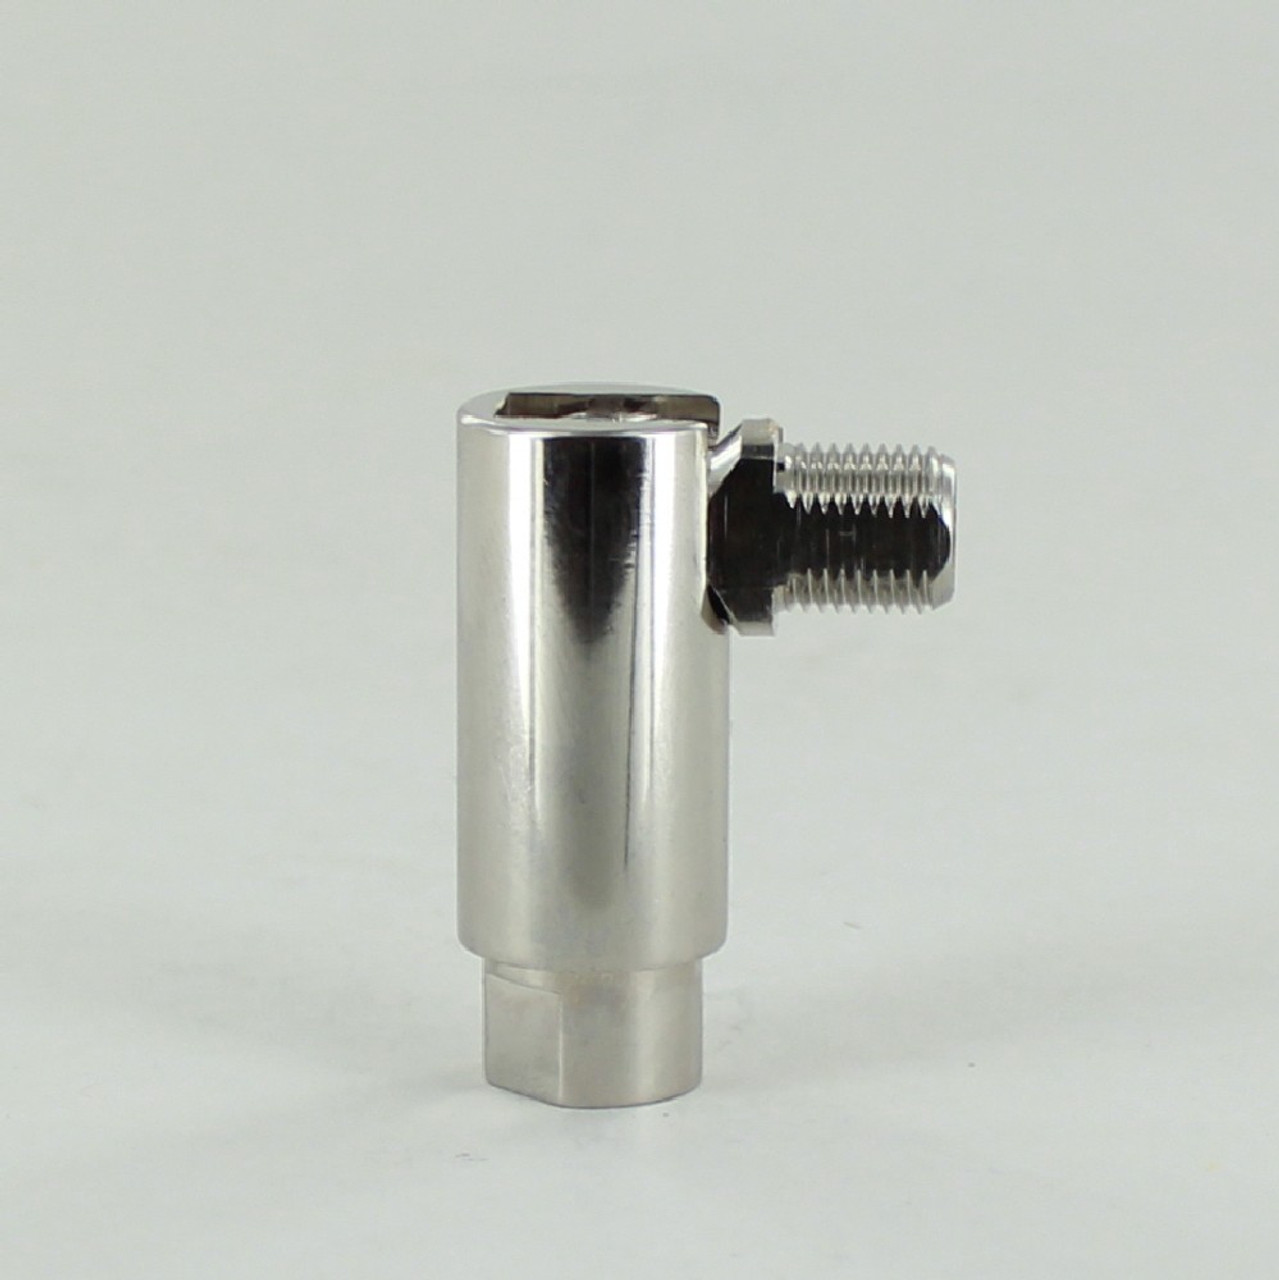 10in Pipe with 1/8ips. Thread - Nickel Plated